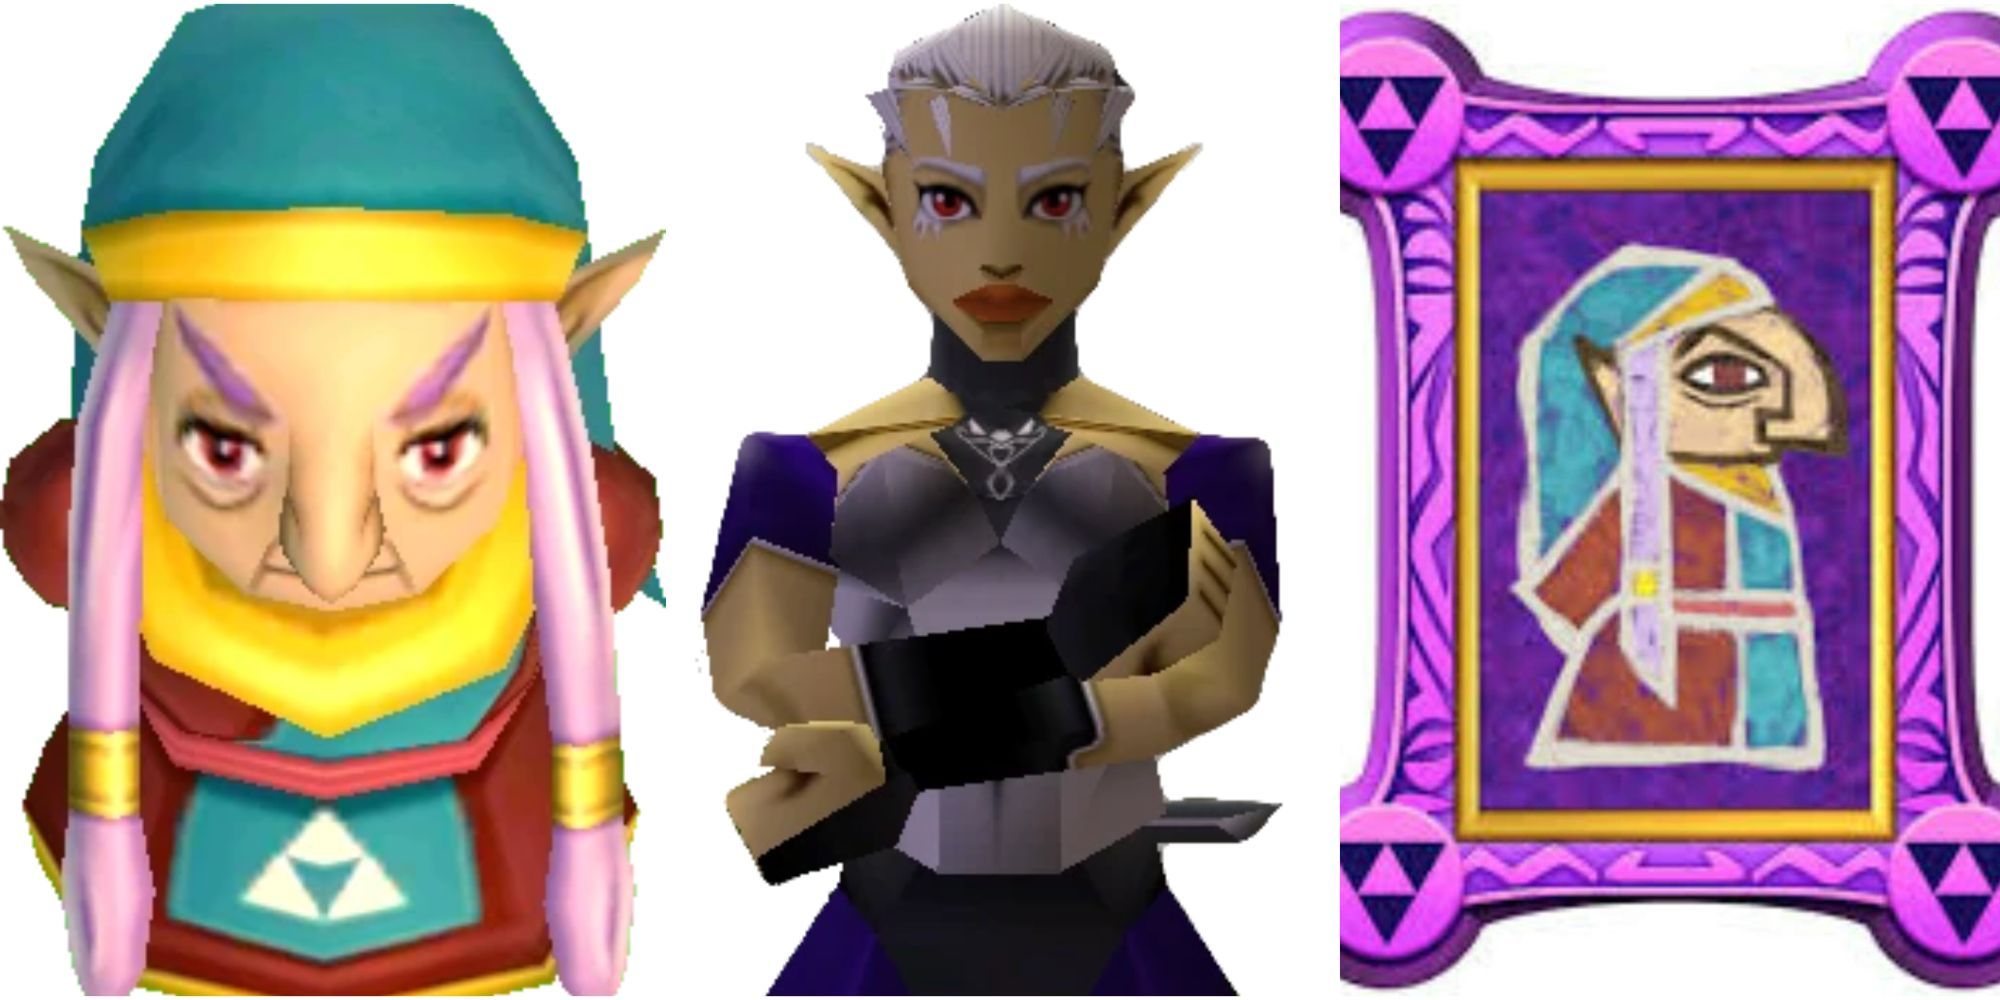 Impa from Ocarina of Time and A Link Between Worlds, including her Sage portrait